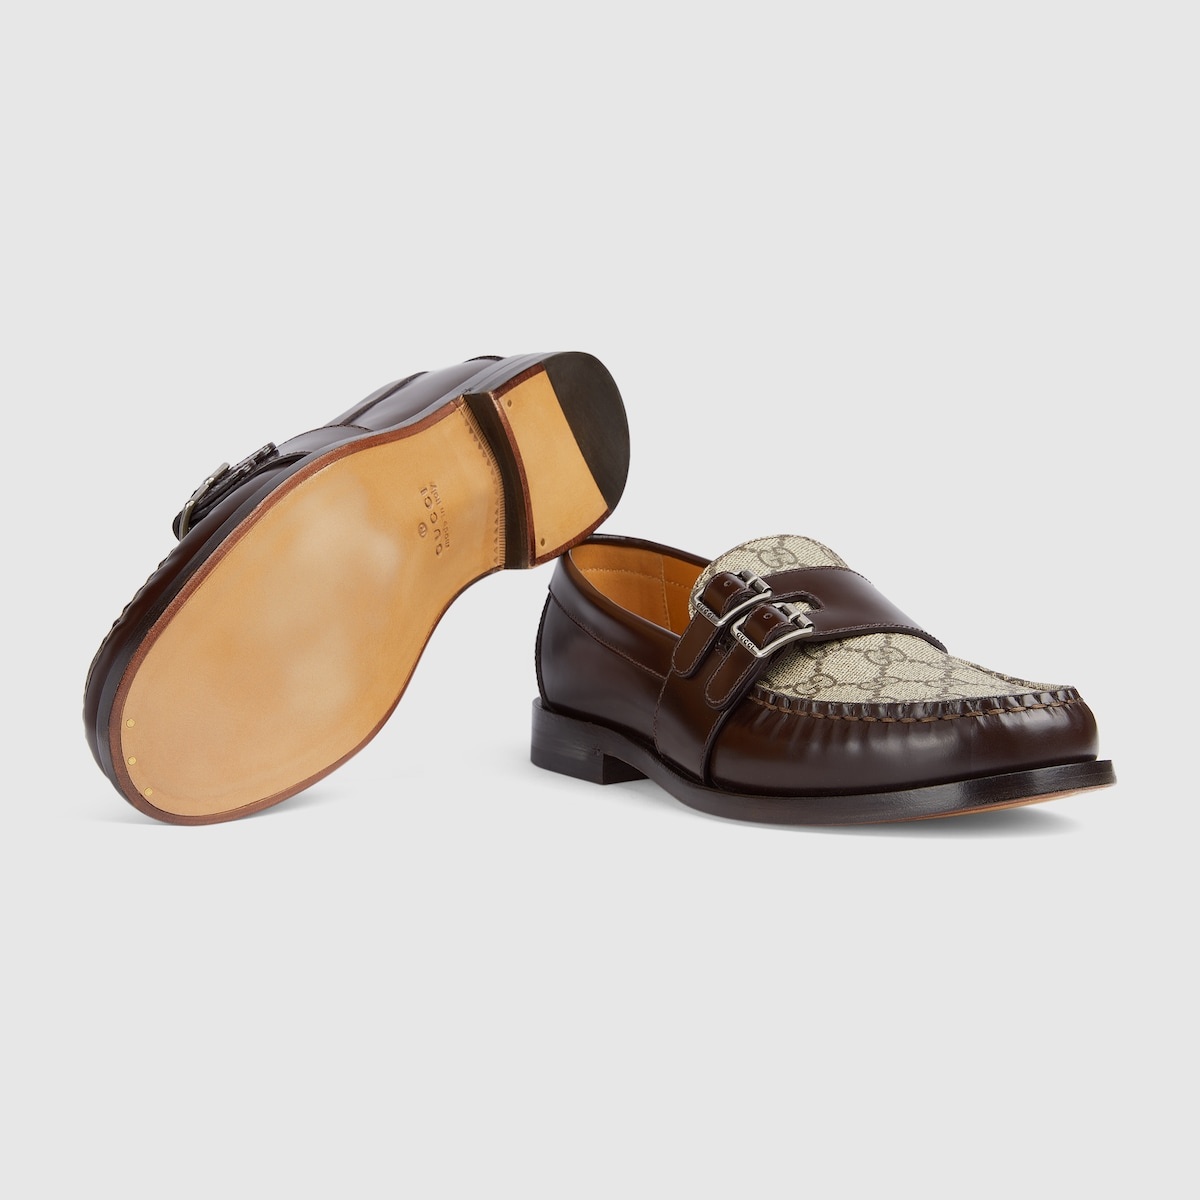 Men's buckle loafer with GG - 6